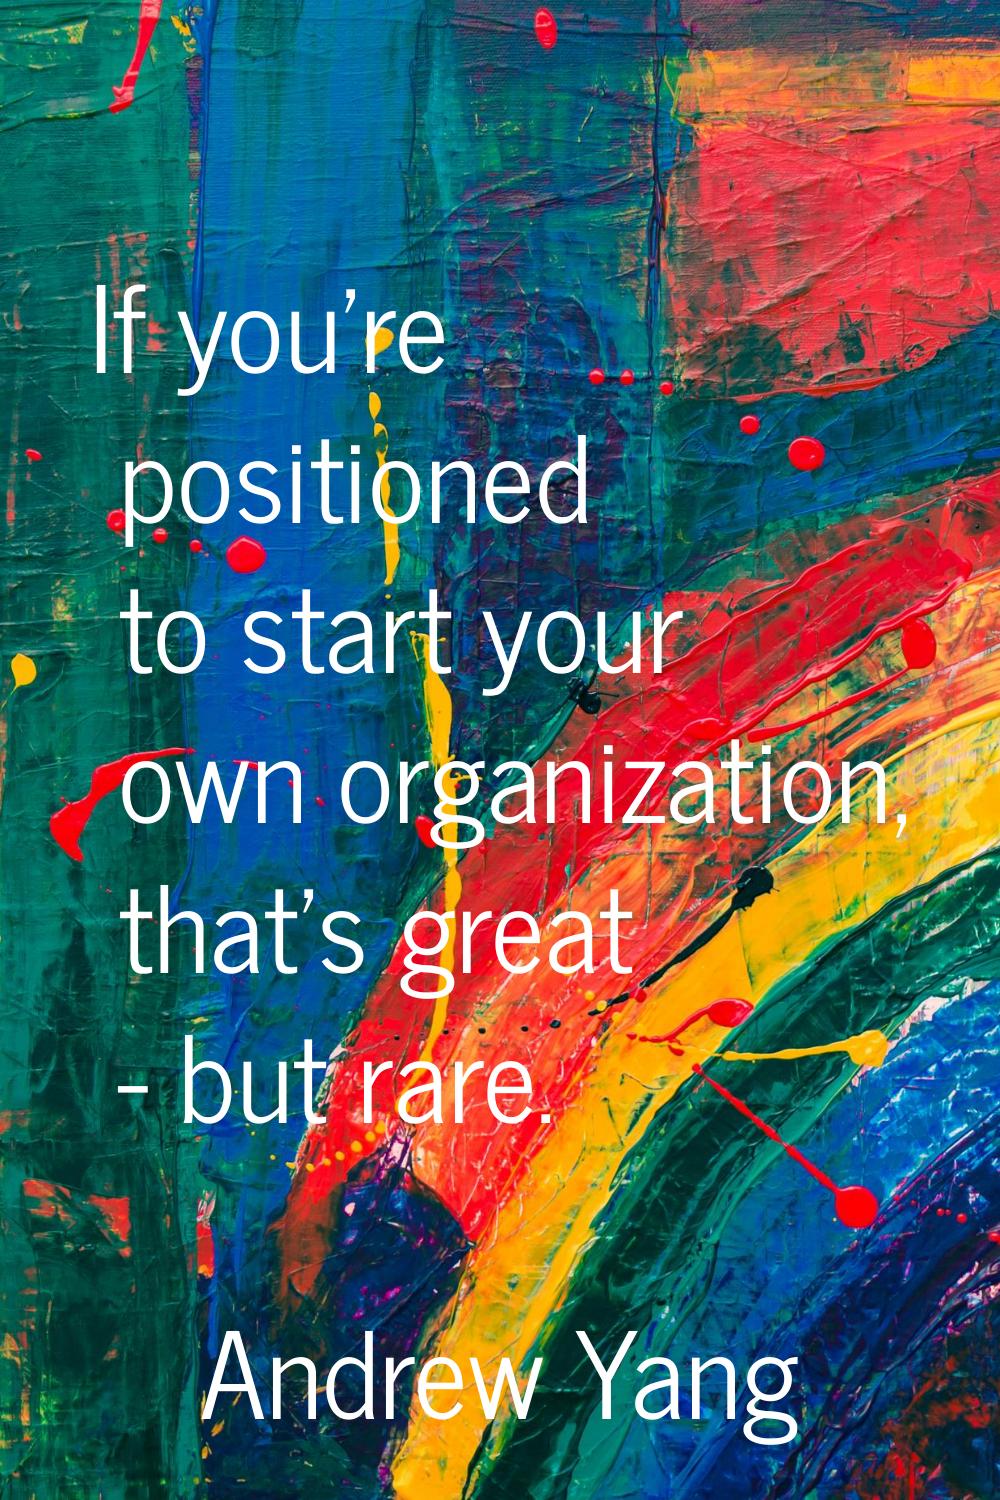 If you're positioned to start your own organization, that's great - but rare.